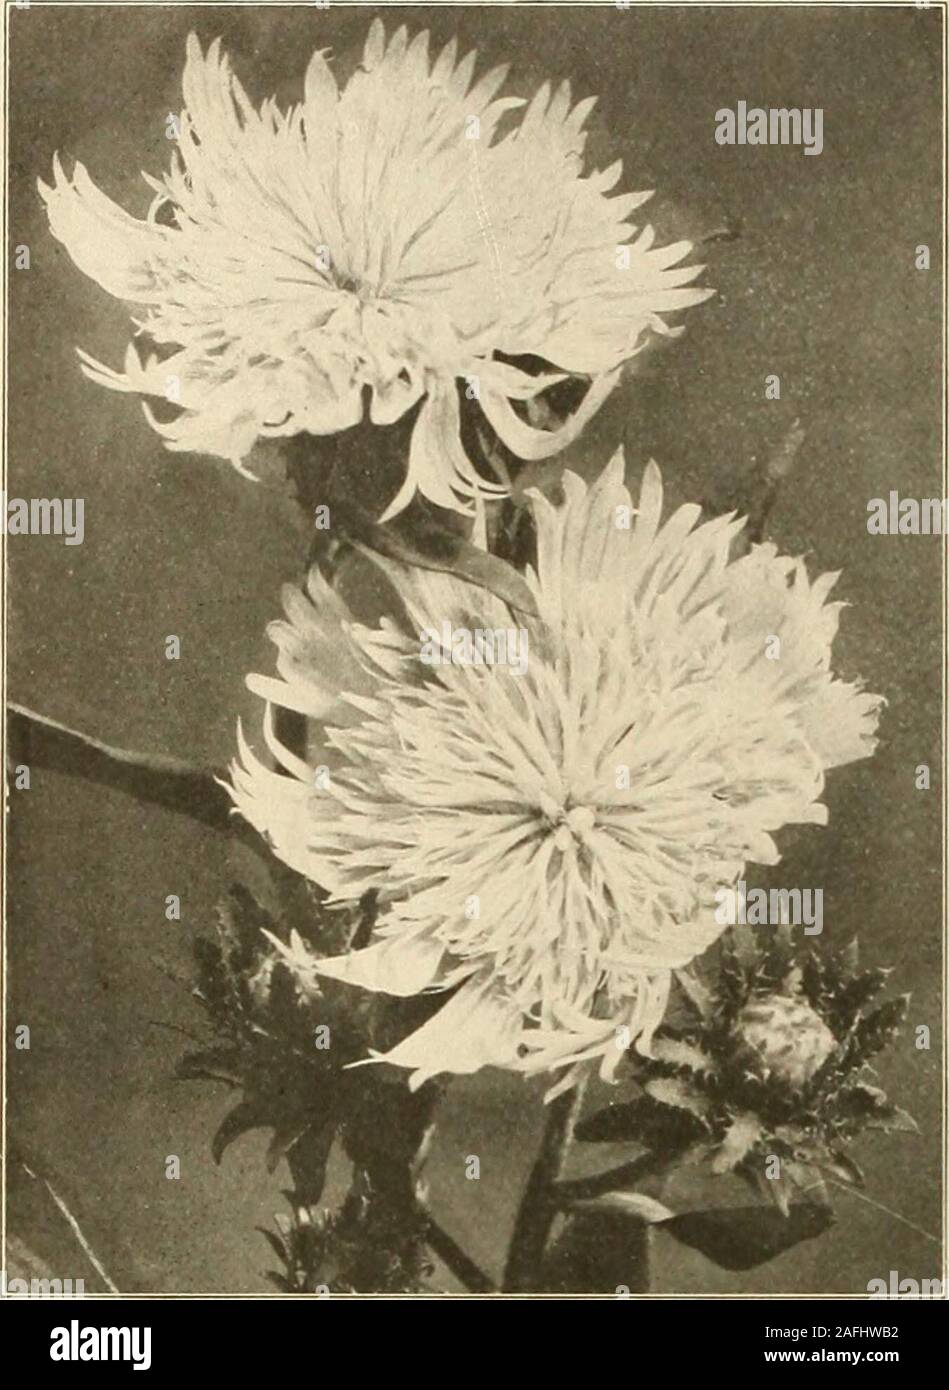 . Farquhar's autumn catalogue : 1913. 6.00 Rudbeckia Herbsonne. 54 •R. & J. Farquhar & CO., Boston. HARDY PERENNIAL PLANTS-Cont/nued.. Telekia cordifolia. Bupthalmum. Tall border plant withbright yellow flowers borne on long stems. July and August. 4 ft Thalictrum adiantifolium. Meadow Rue. Foliage likethe Maiden Hair Fern. Flowers creamy-white; May and June, ij ft Baumanni. Flowers yellow. 2 feet. July. .Thermopsis caroliniana. Magnificent free-blooming plantwith tall spikes of clear yellow flowers; June and July. 5 ft.Trillium. See page 40.Trollius caucasica. Orange Globe. Rich orange. europ Stock Photo